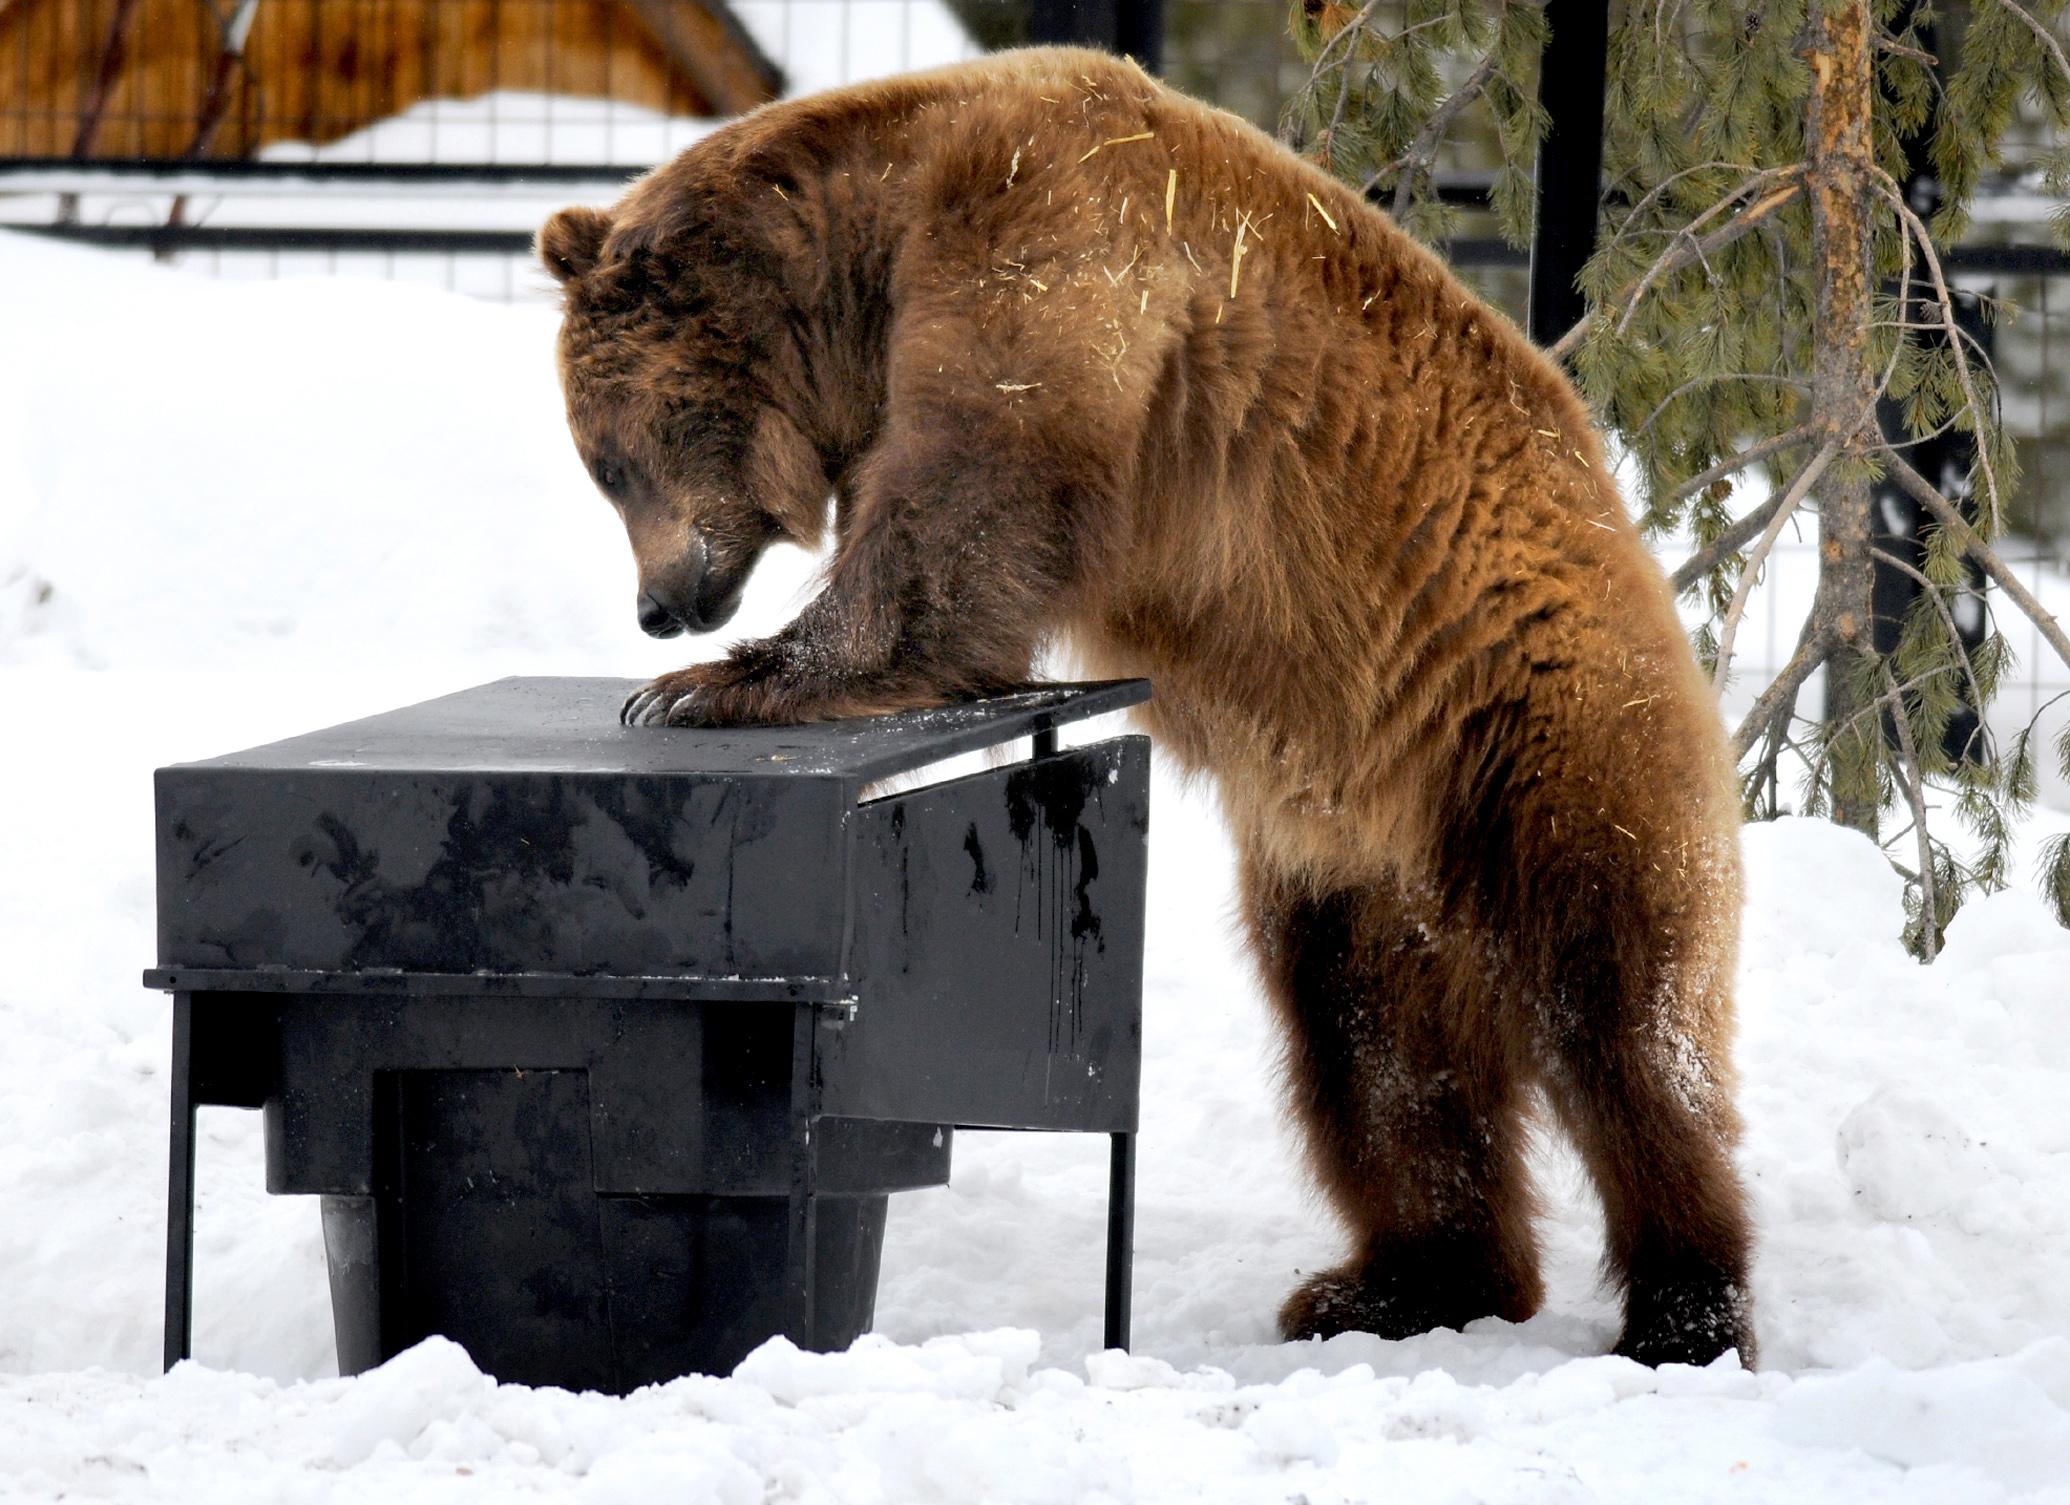 Outdoors Tech: “Bear-proof” food containers continue to evolve and ...